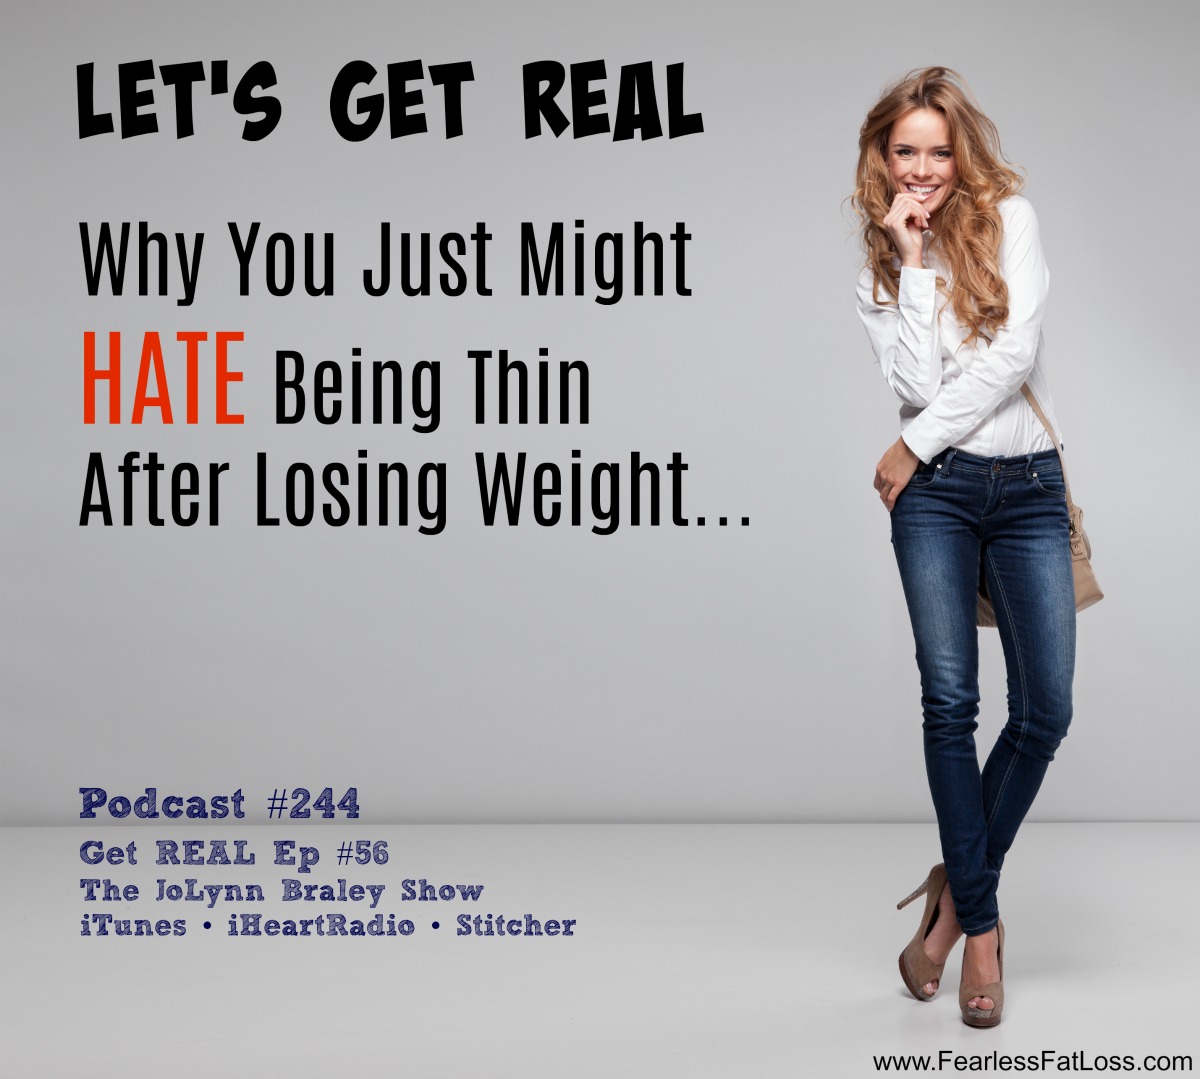 Let's Get REAL: Why You Just Might HATE Being Thin After Lose Weight | Free Weight Loss Podcast #244 | The JoLynn Braley Show | Permanent Weight Loss Coach JoLynn Braley | FearlessFatLoss.com